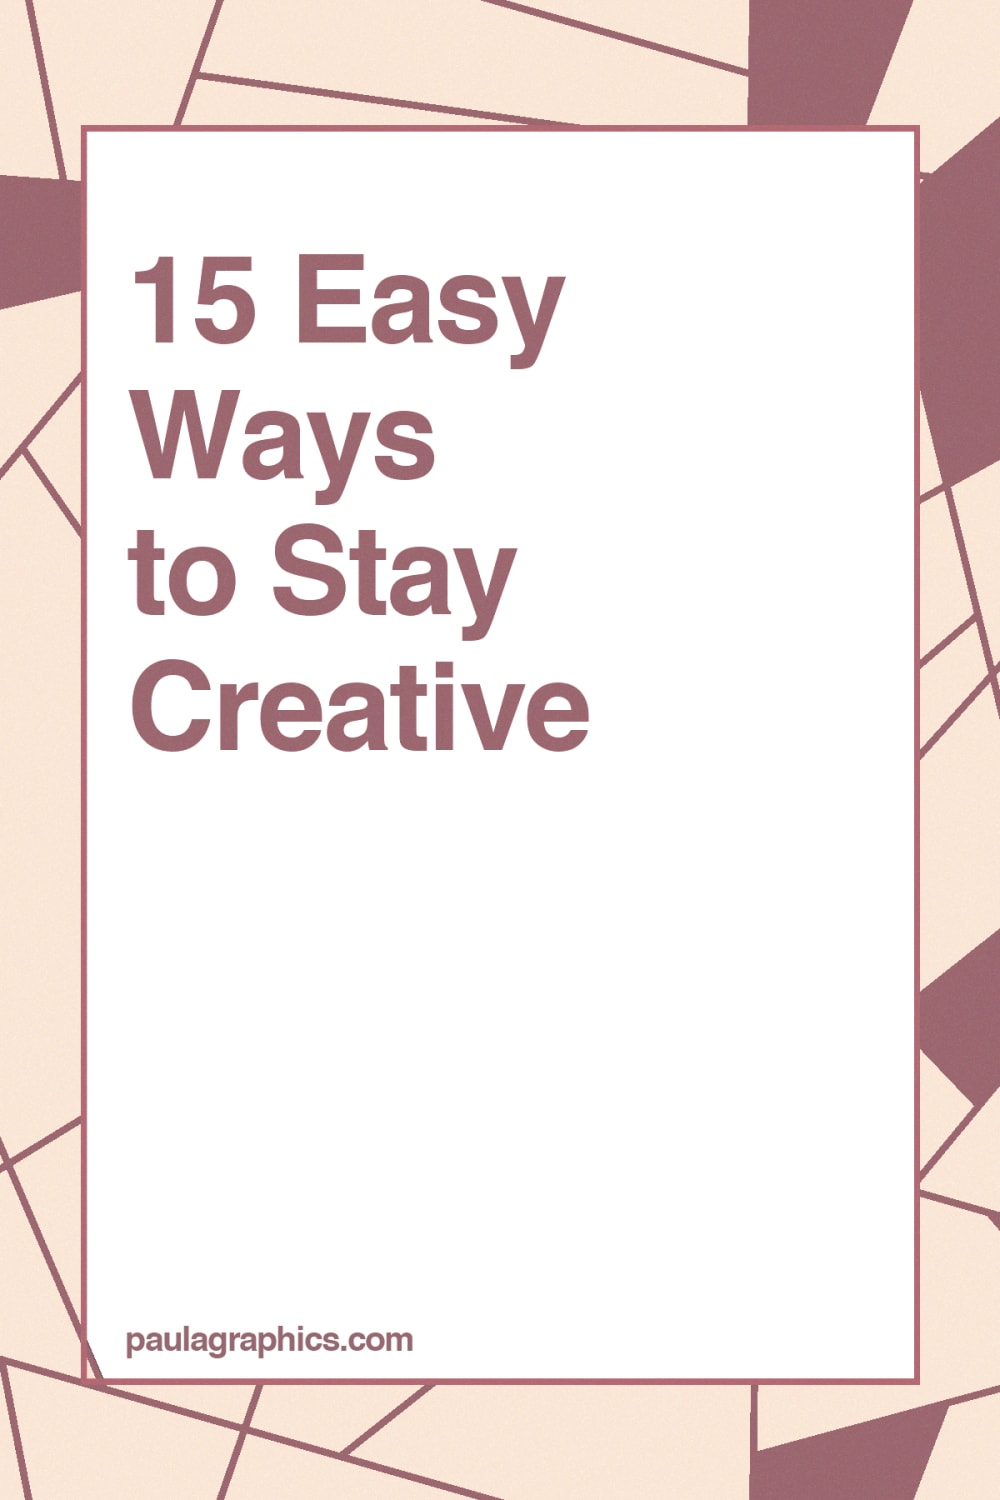 15 Easy Ways to Stay Creative